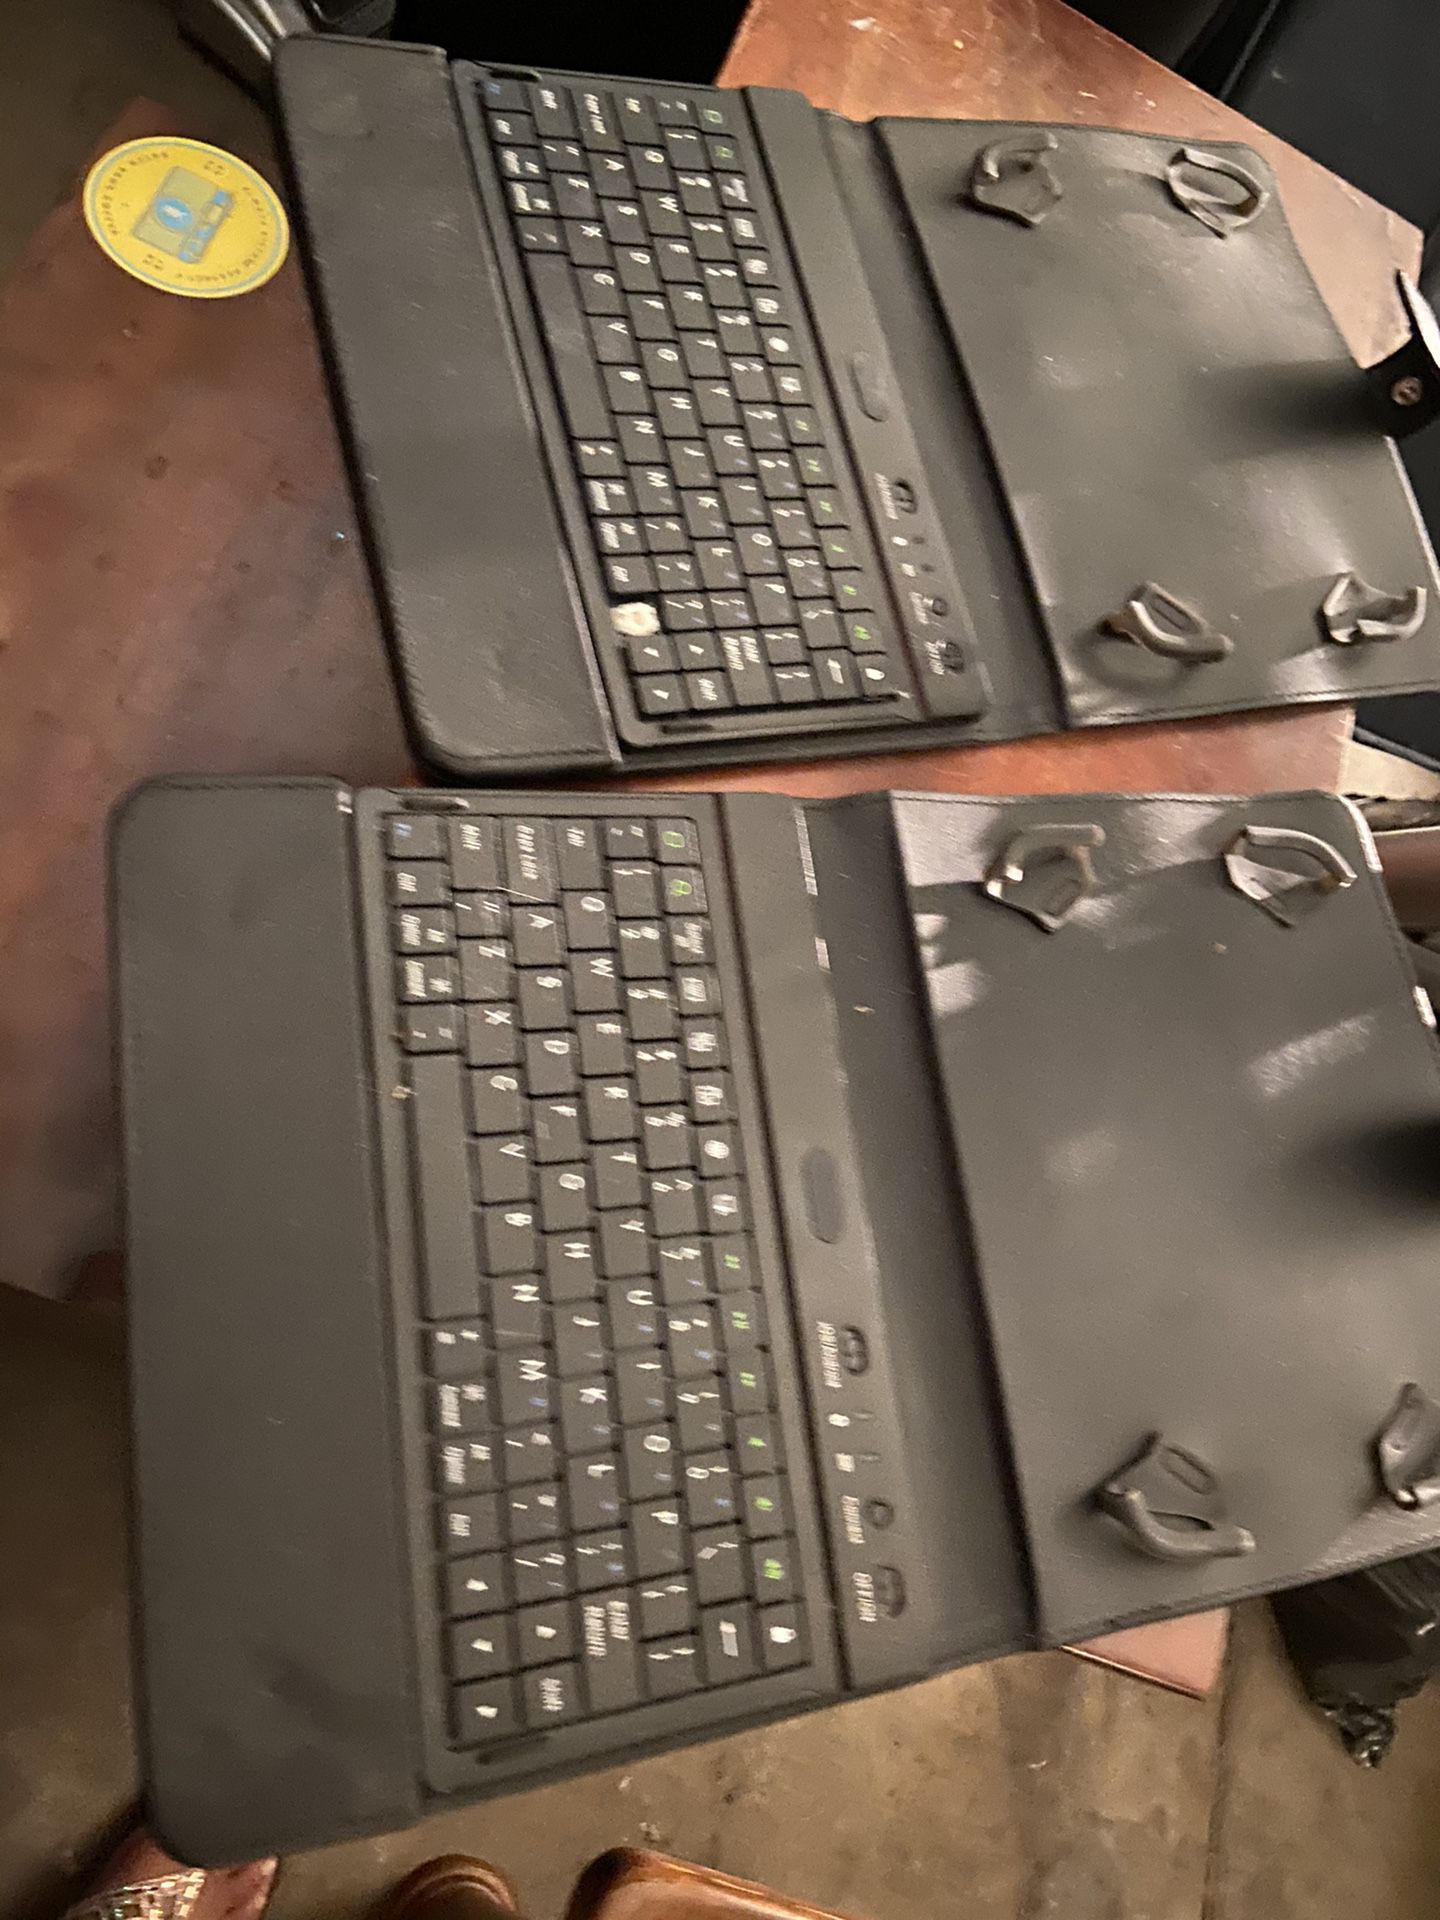 keyboard for tablets?